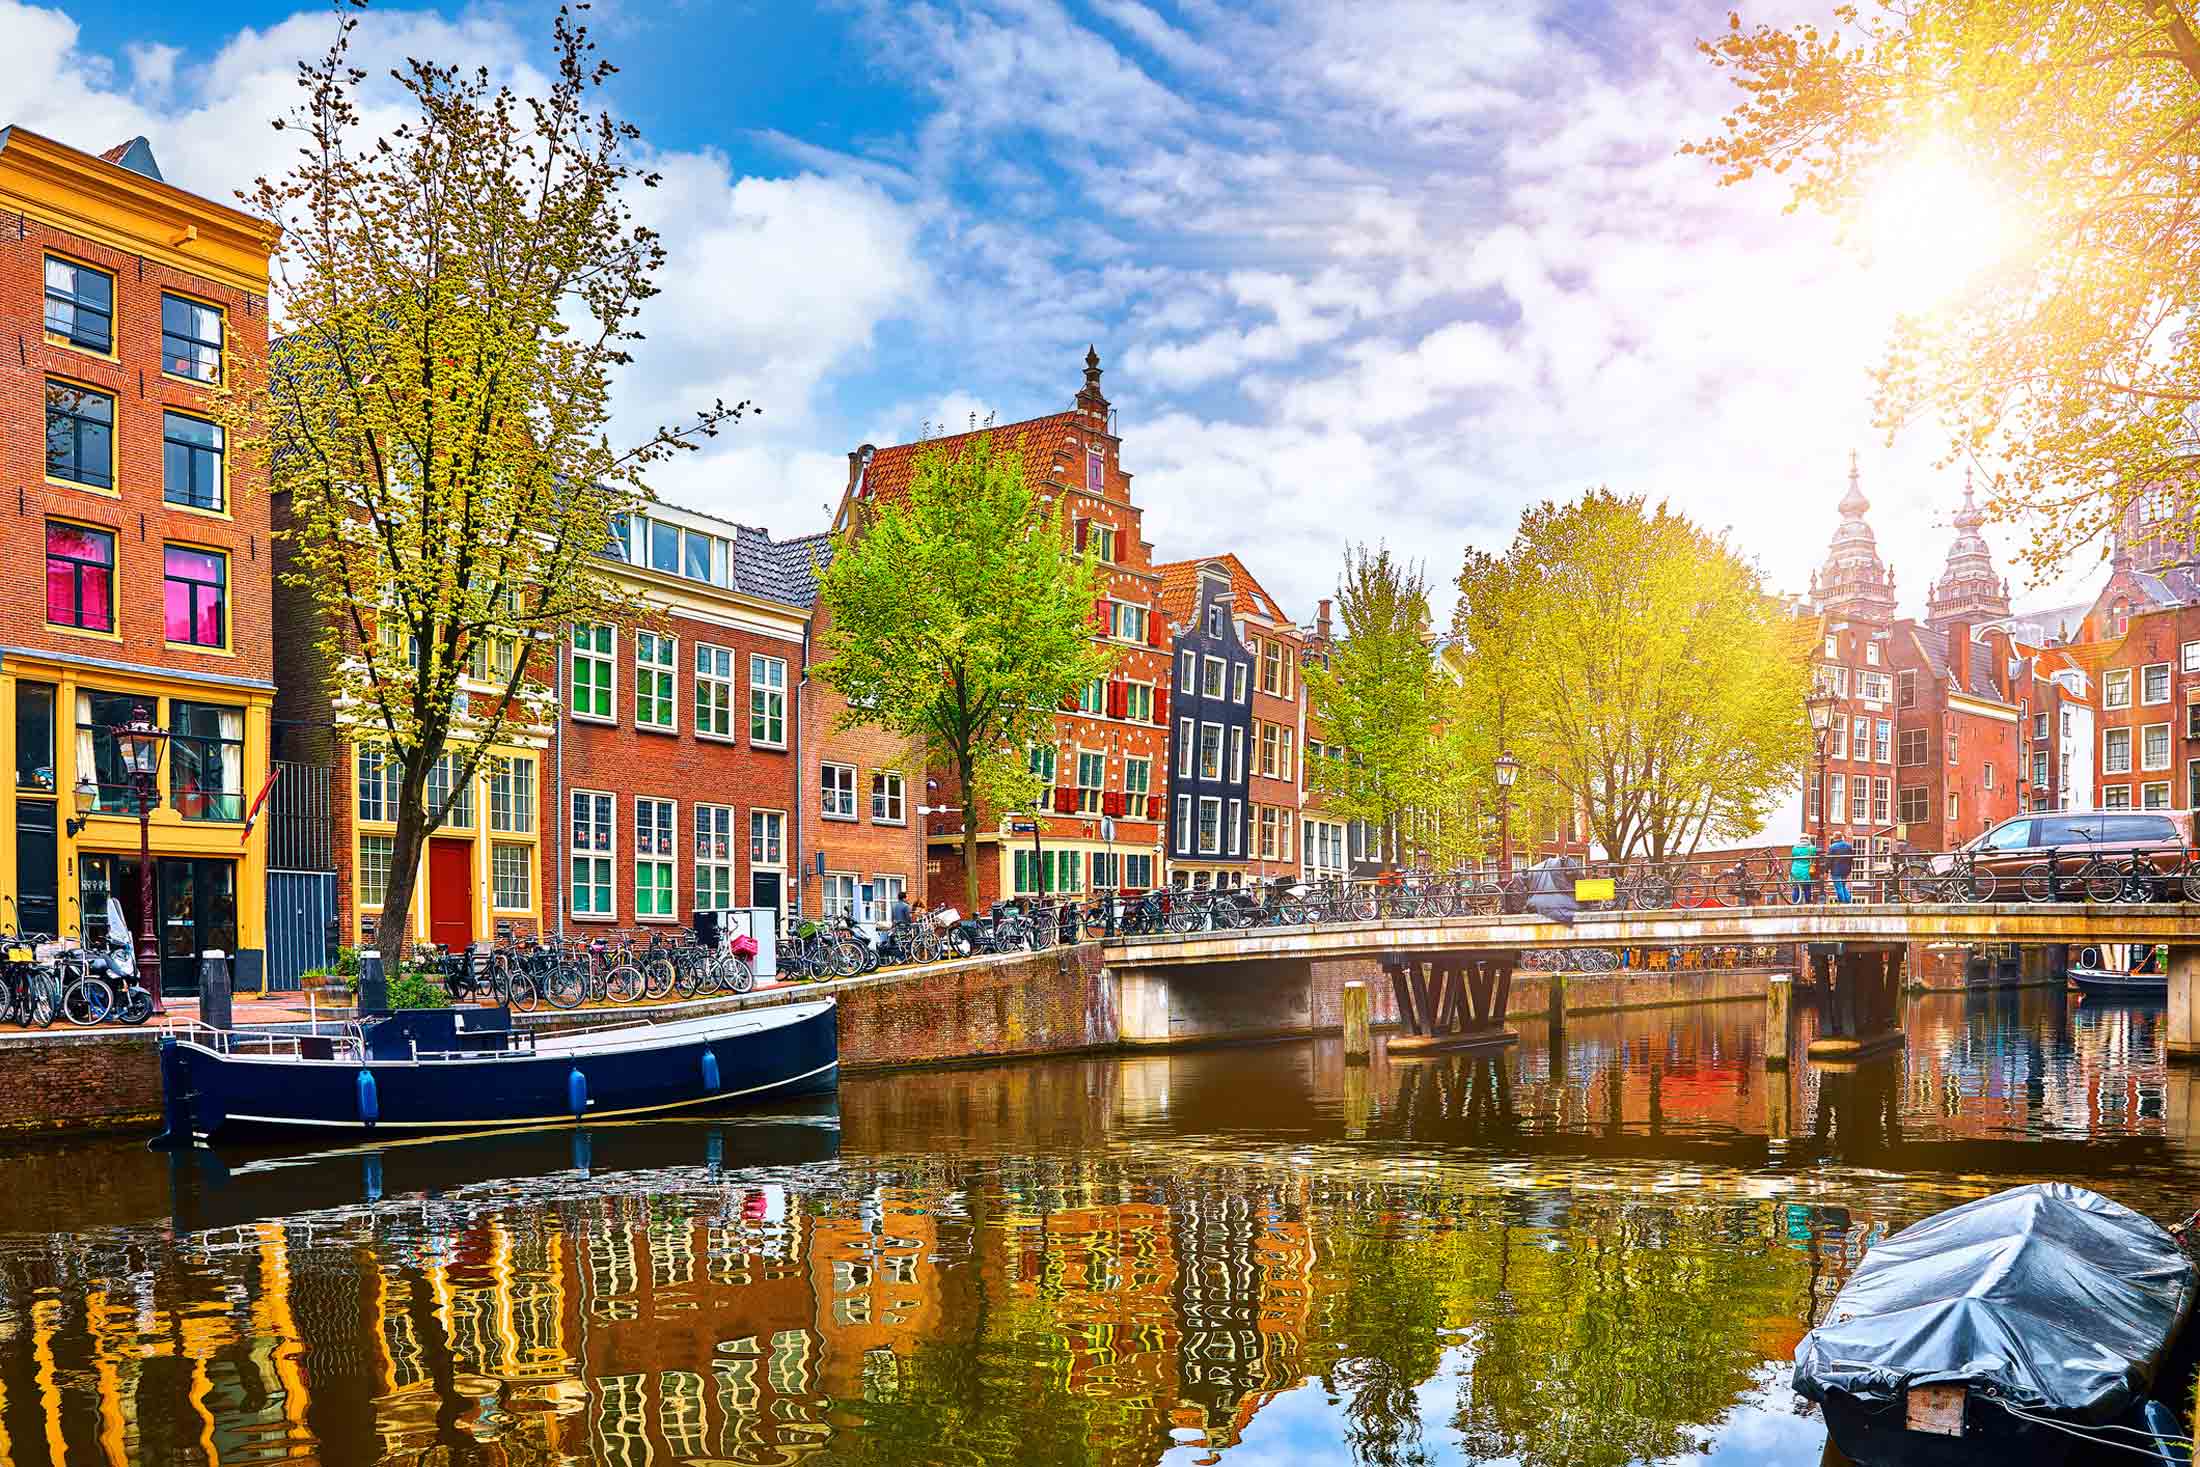 HOLIDAY AND FESTIVALS IN AMSTERDAM